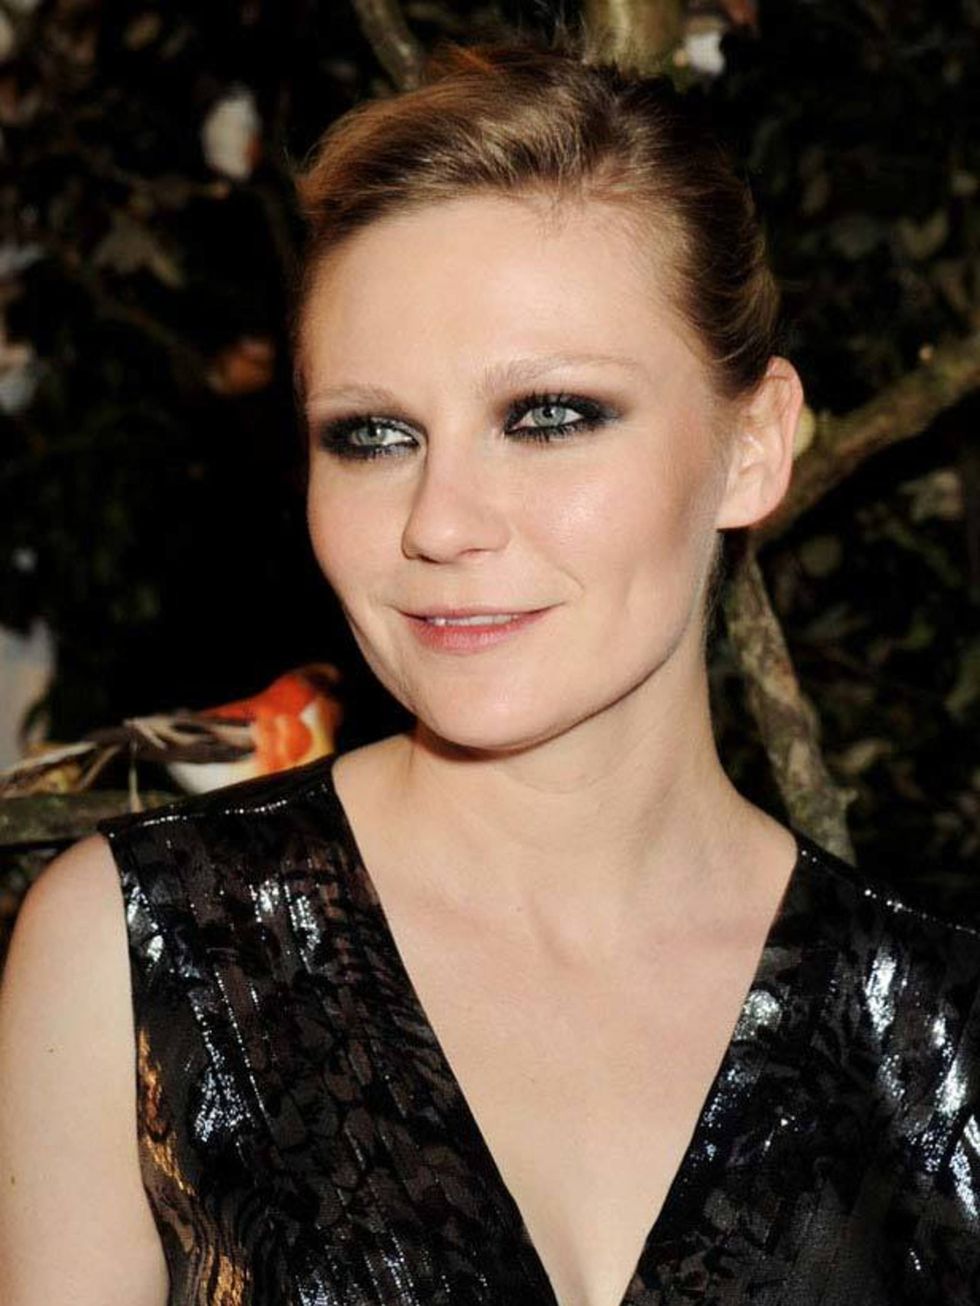 <p><a href="http://www.elleuk.com/starstyle/style-files/(section)/kirsten-dunst">Kirsten Dunst</a>, Mulberry After Party, London, February 2011</p>